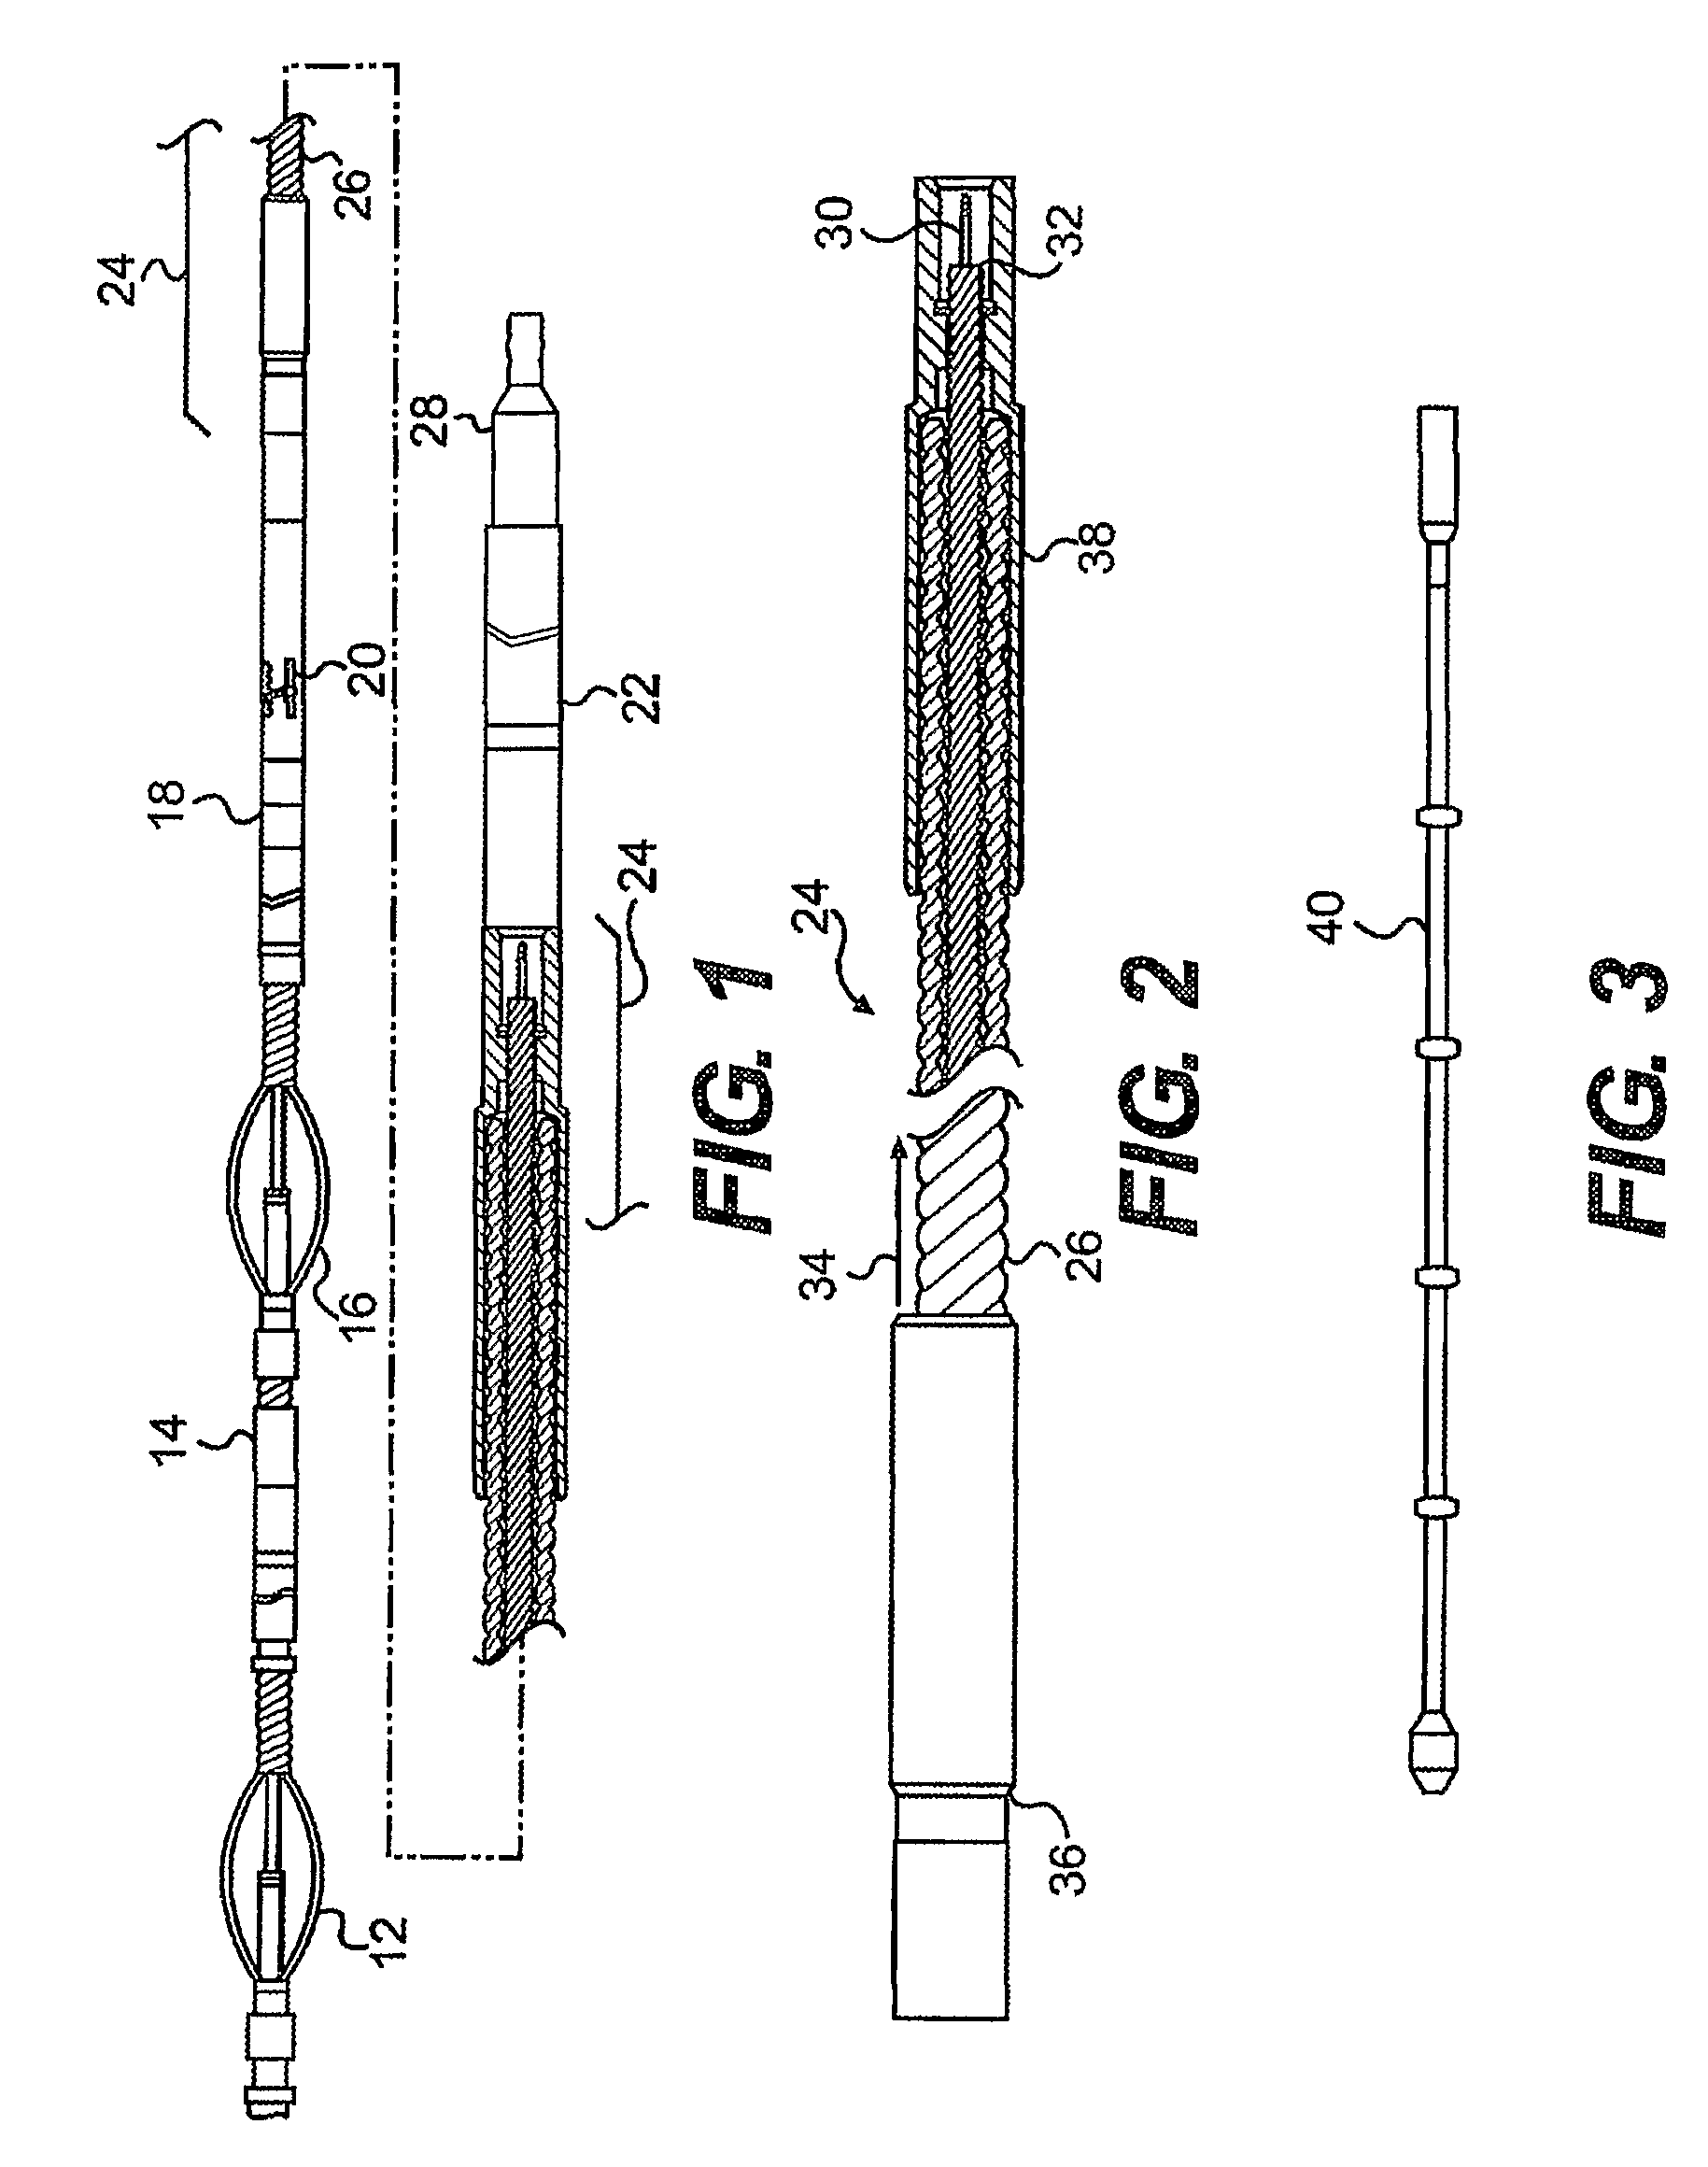 Flexible sinker bar with electrically conductive wires